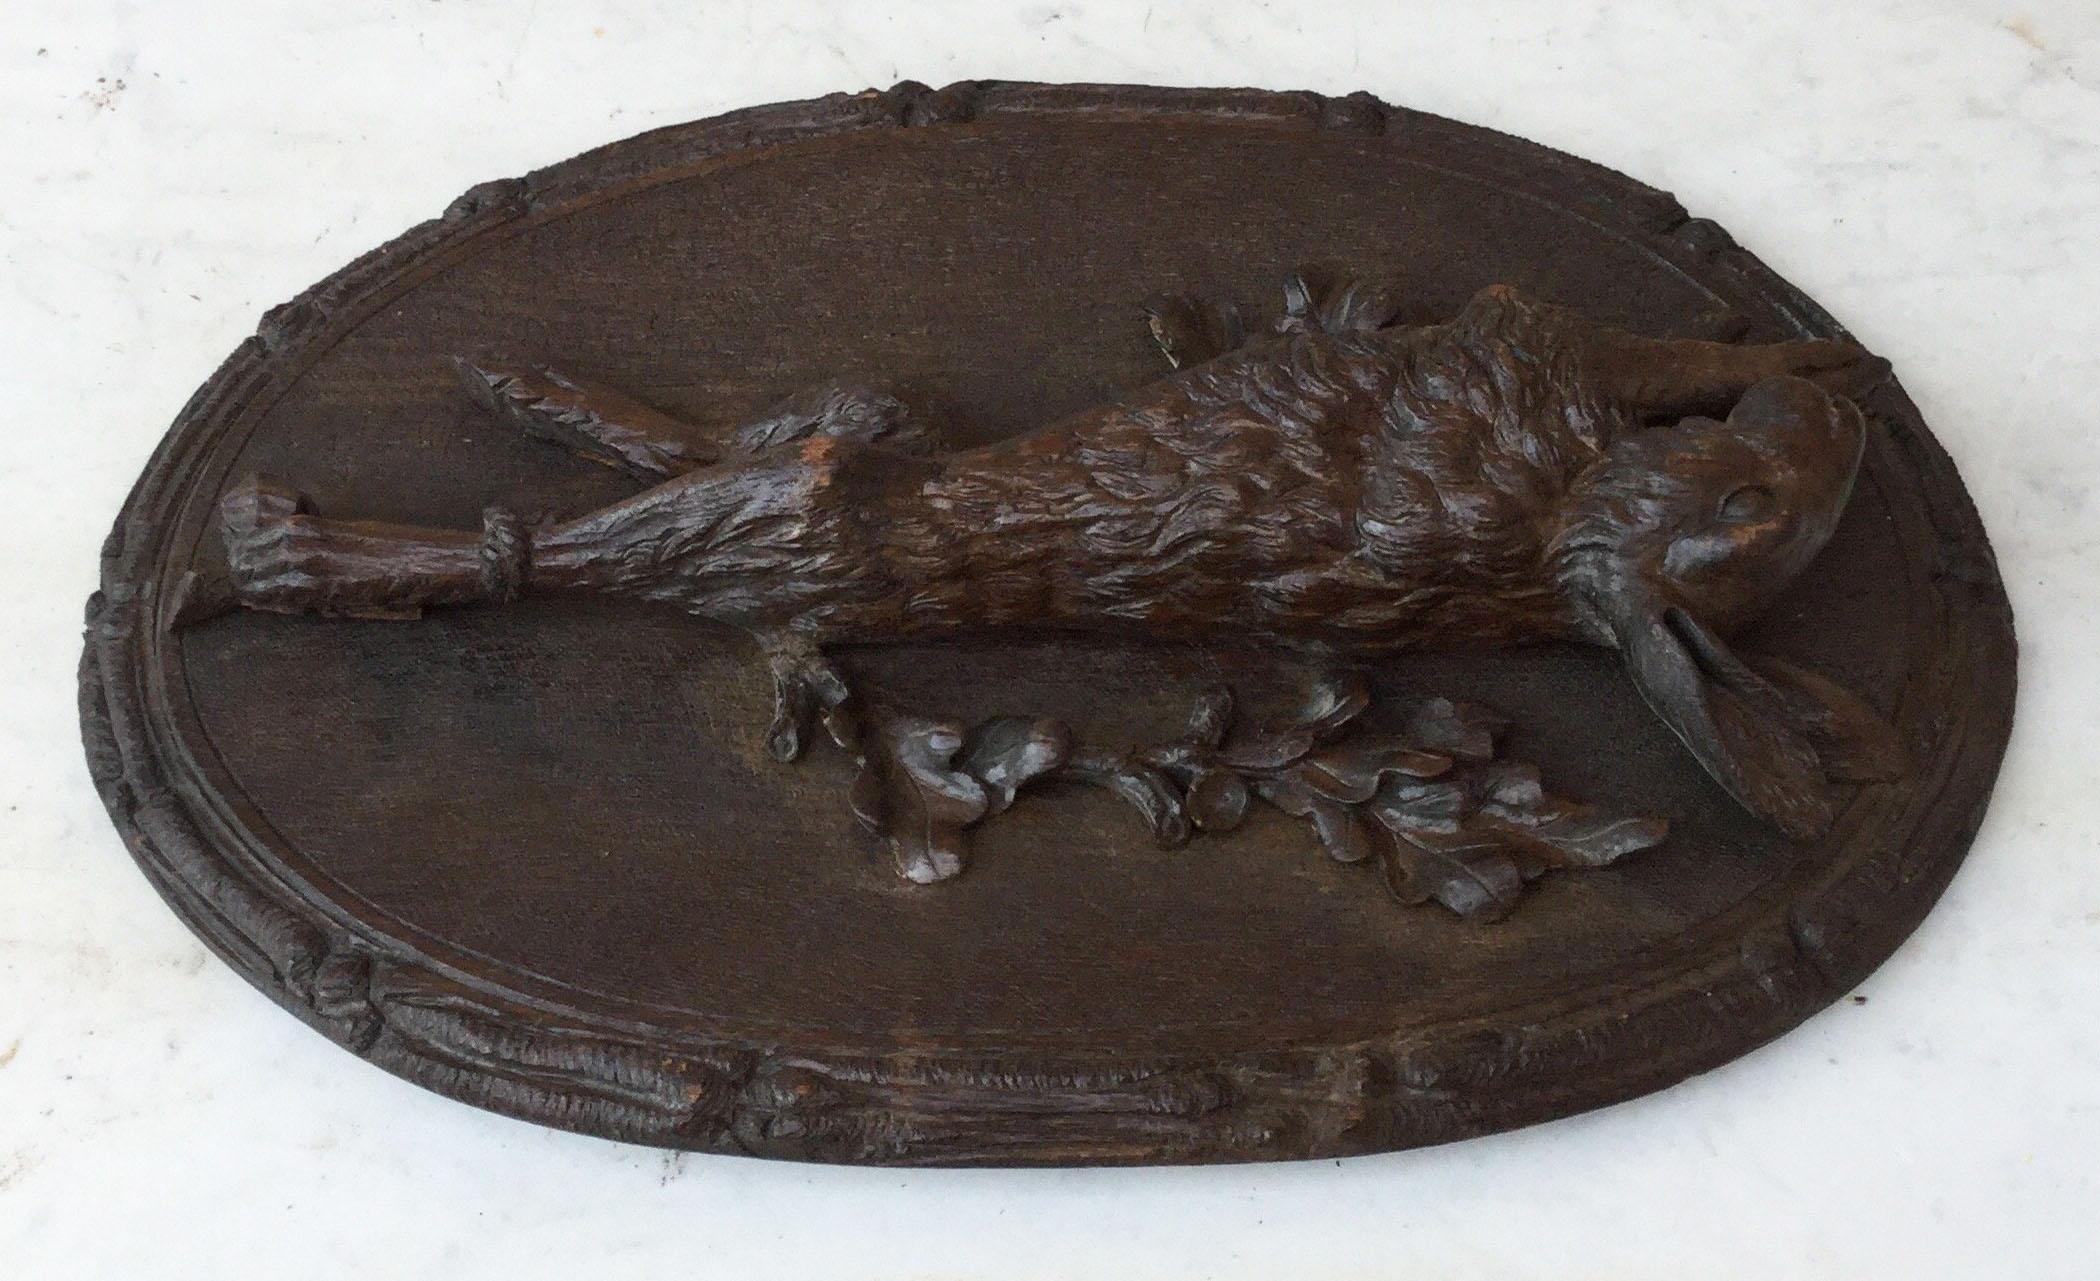 Fine Black Forest carved wood wall plaque on a medallion with a hare or jackrabbit on oak leaves circa 1880.
Carved oakwood.